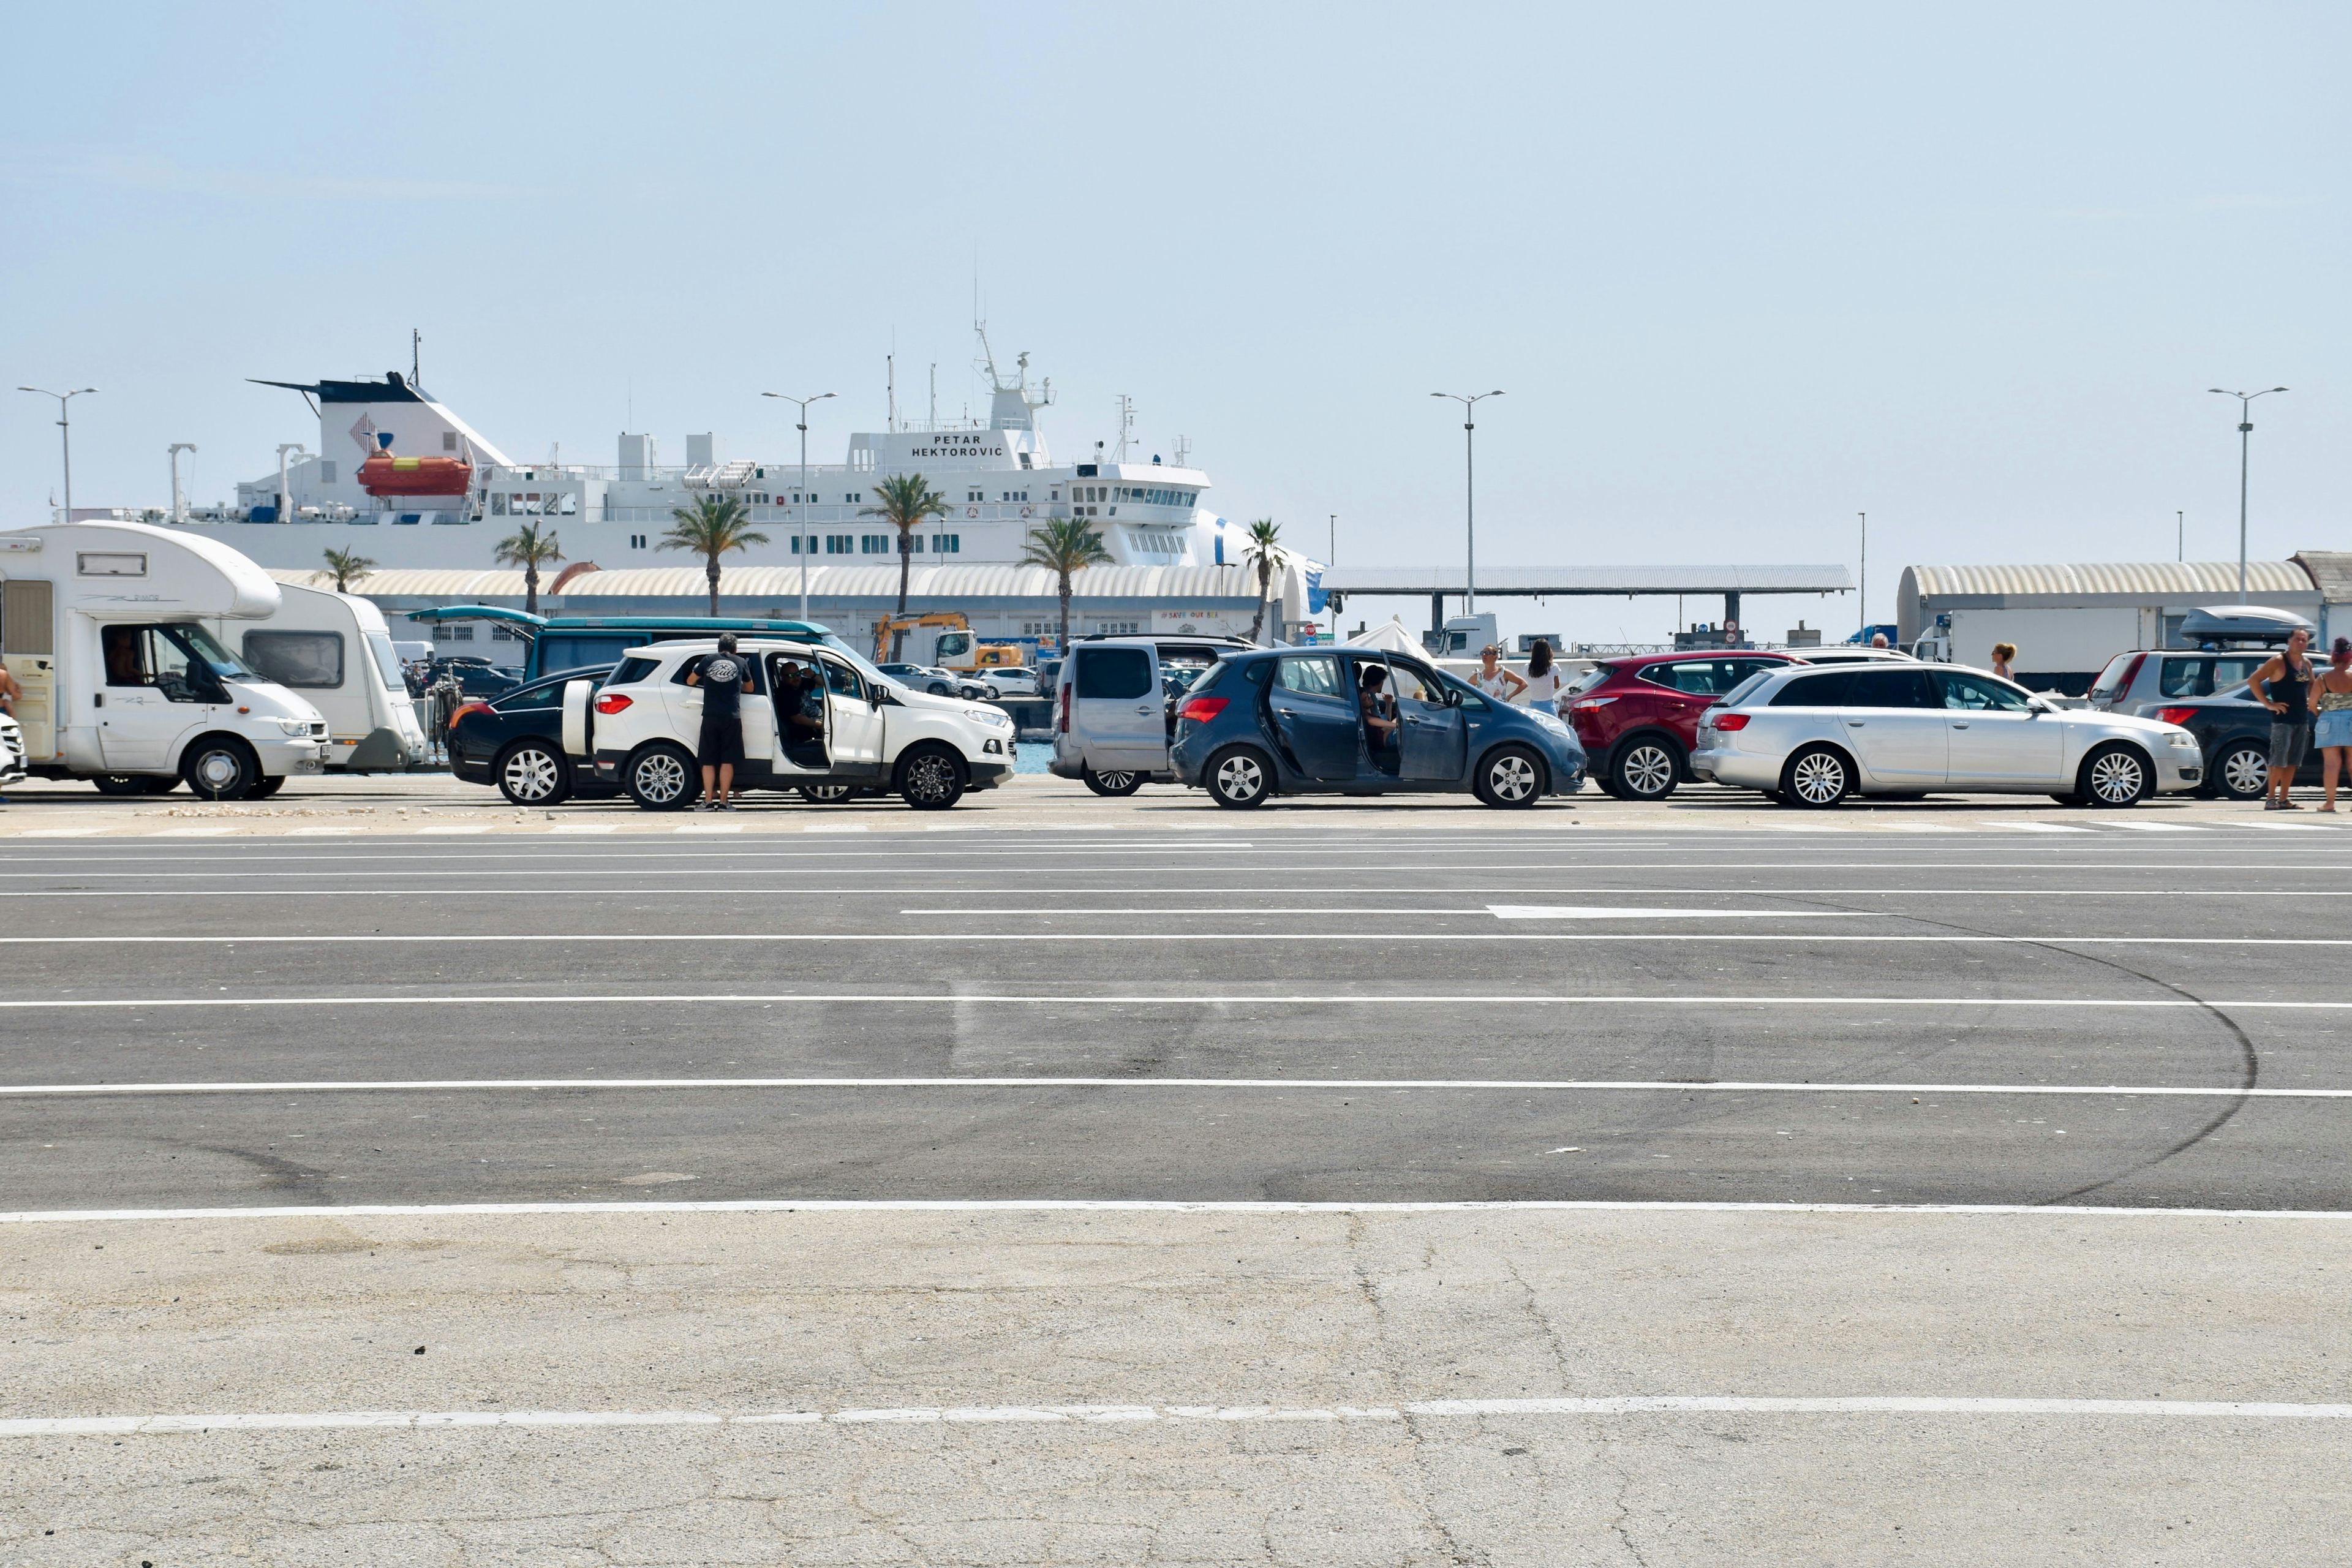 Vehicles queue for ferry entry in Split, Croatia